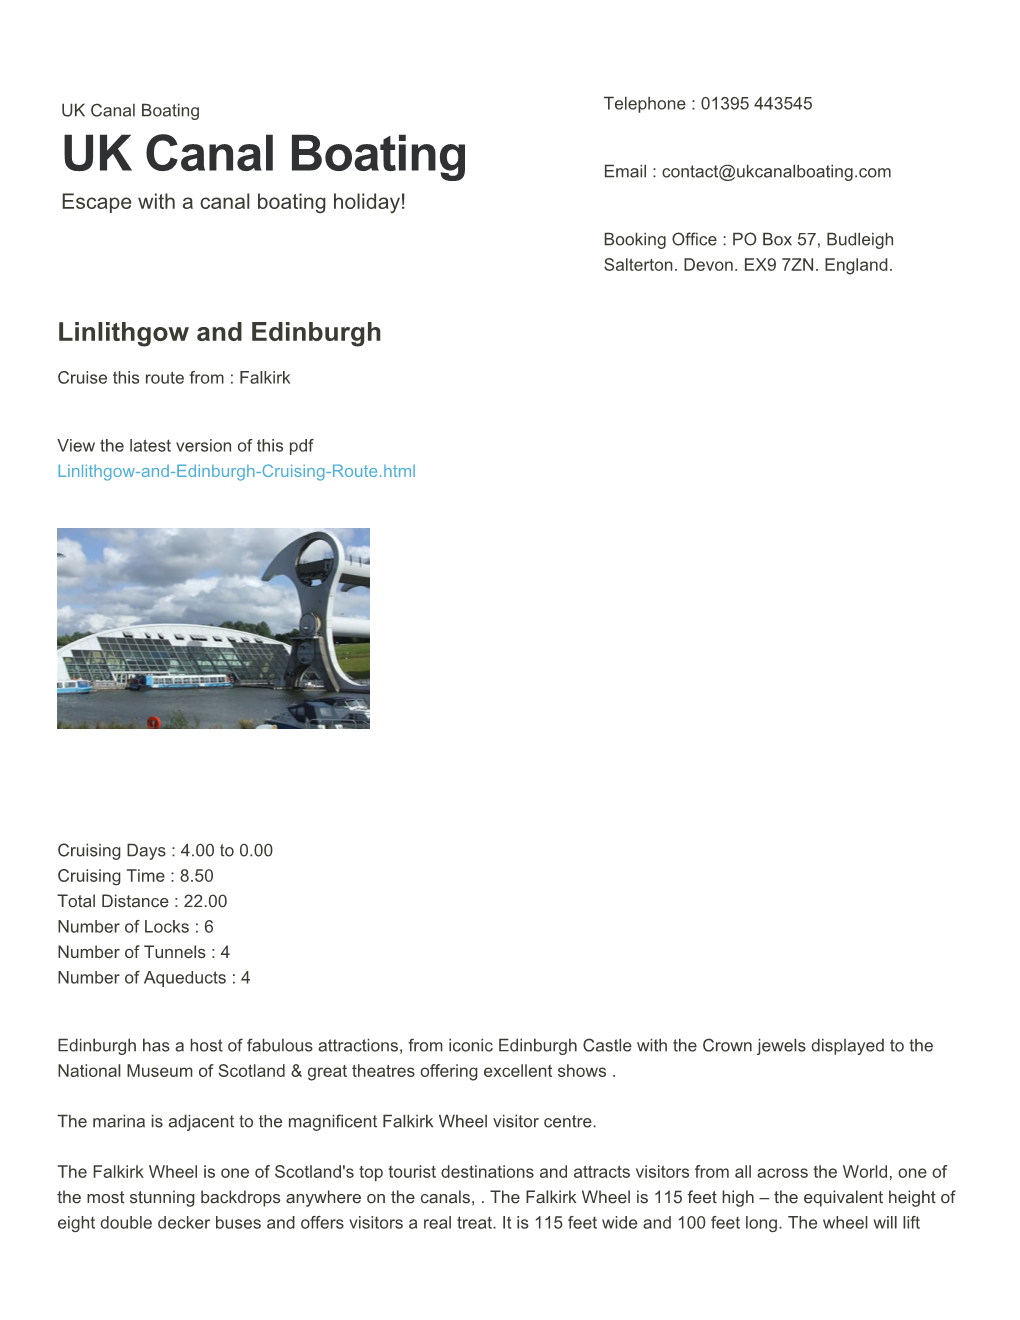 Linlithgow and Edinburgh | UK Canal Boating